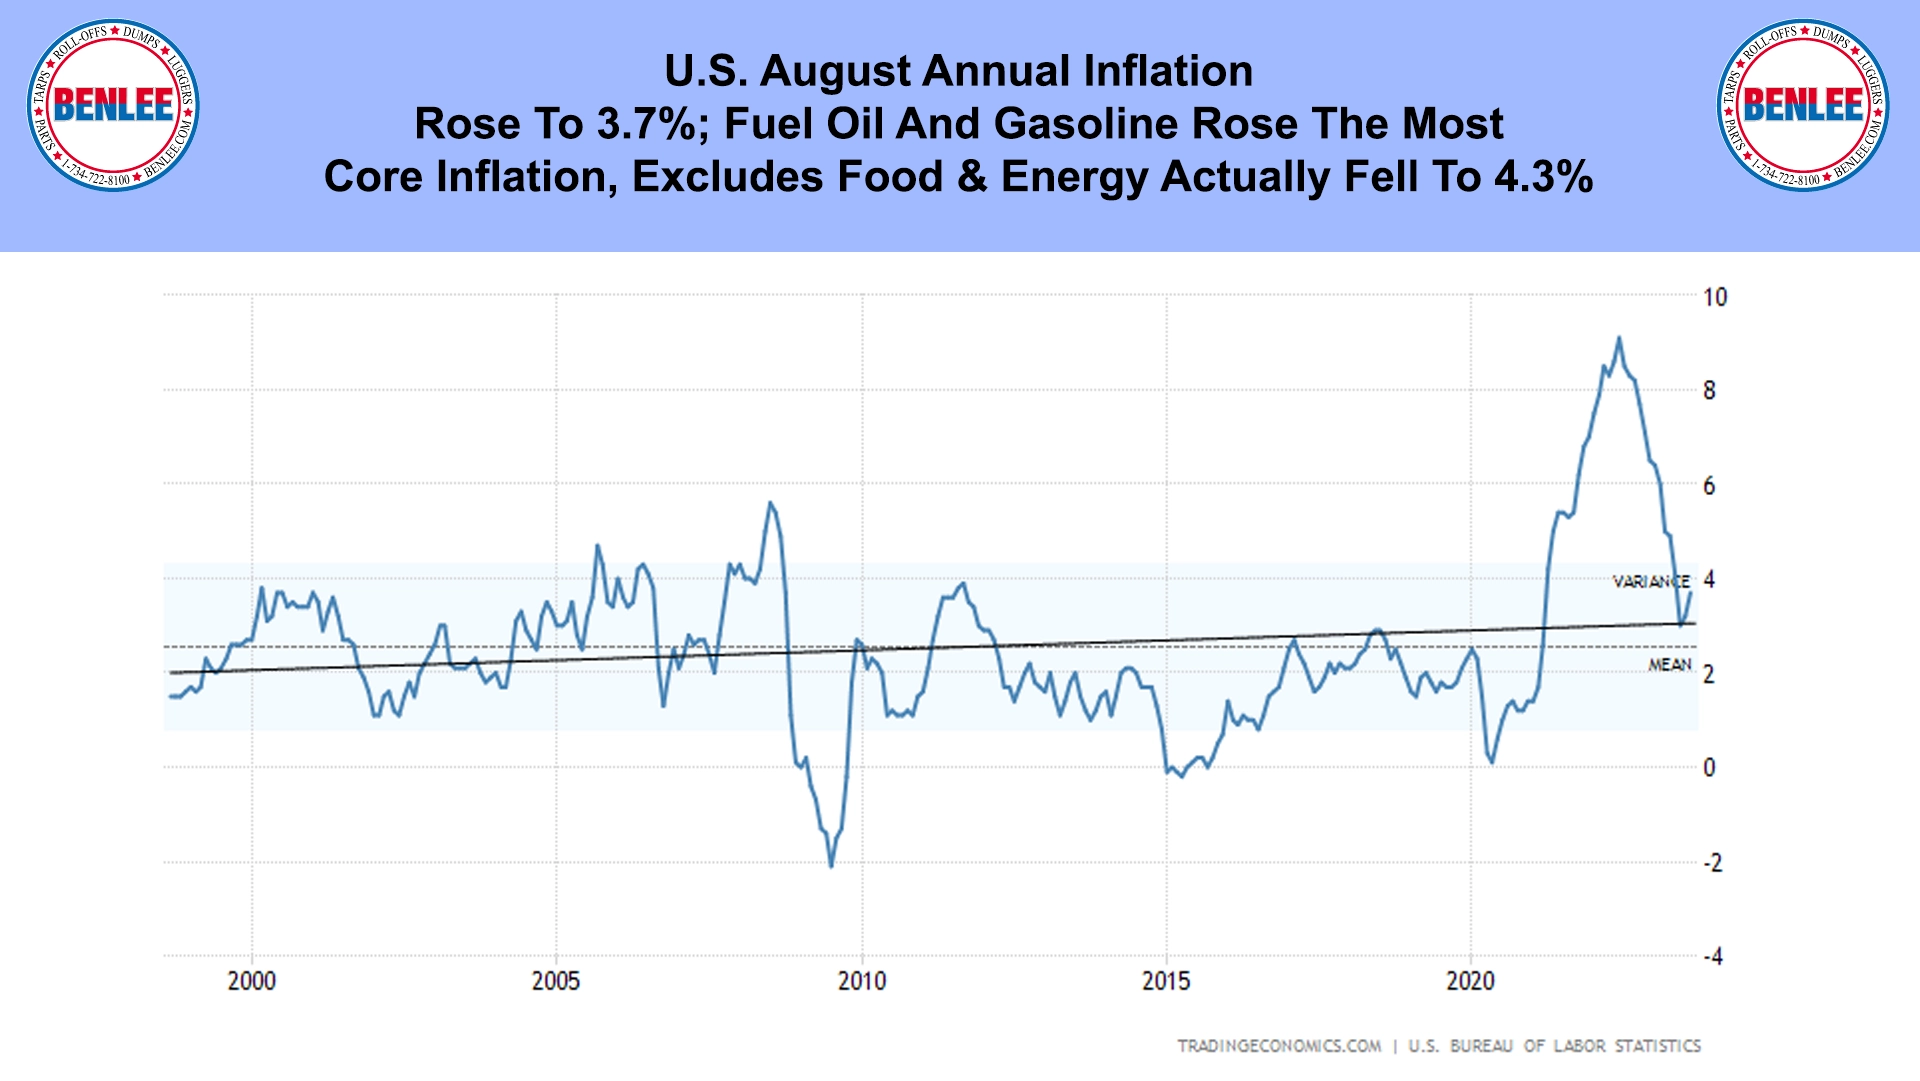 U.S. August Annual Inflation